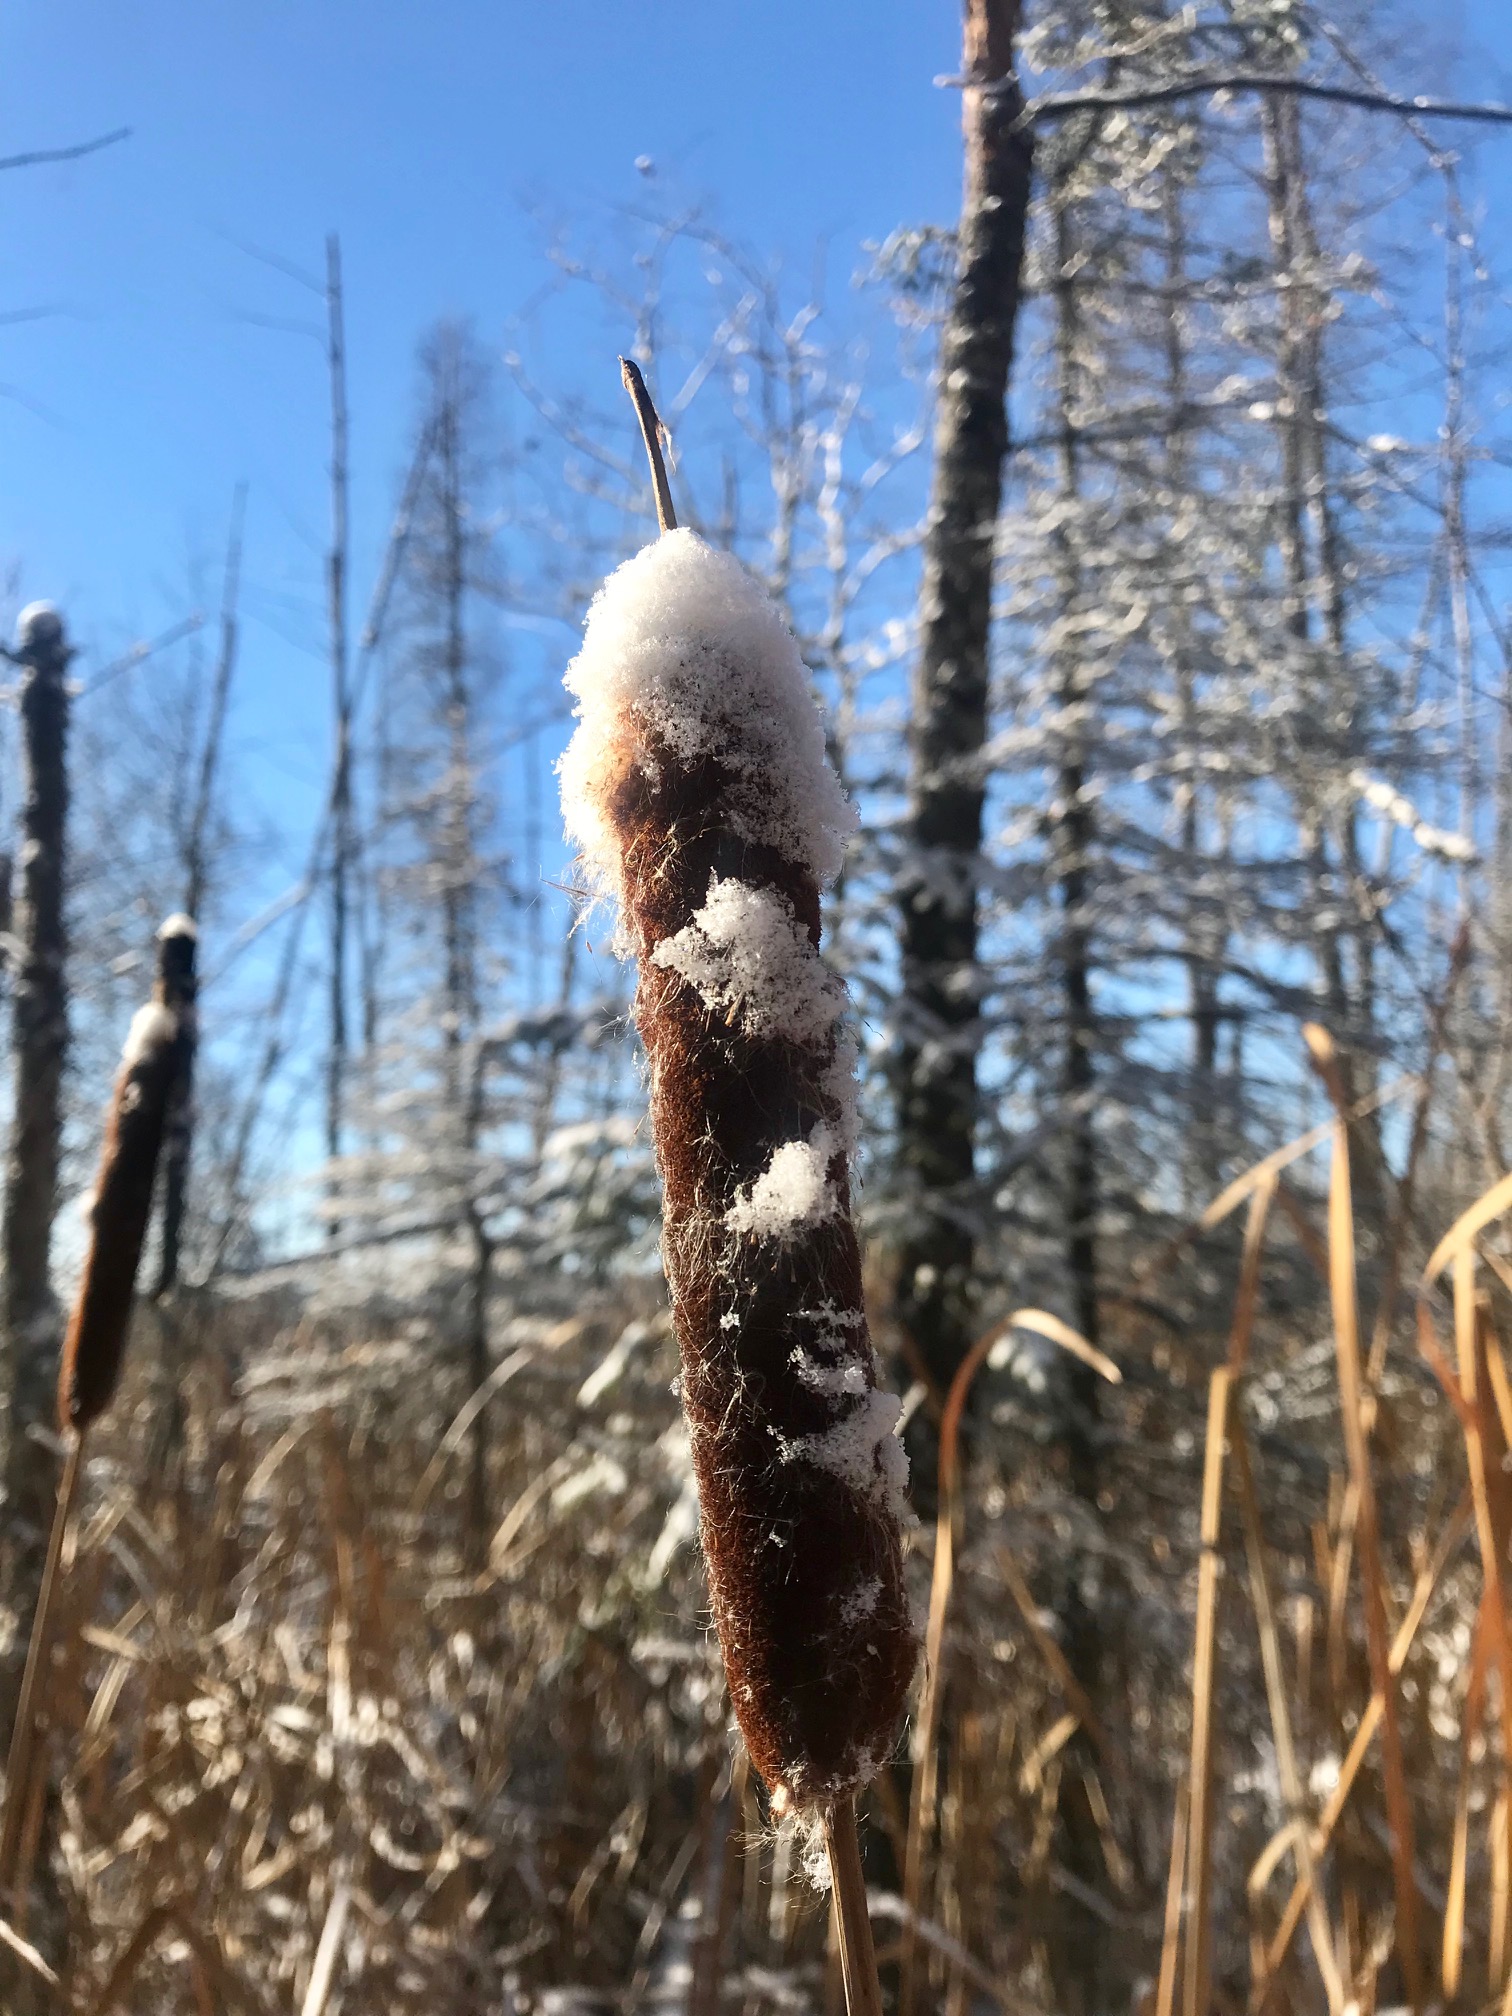 Cattail with touch of new snow dusting. November 9th, 2017.